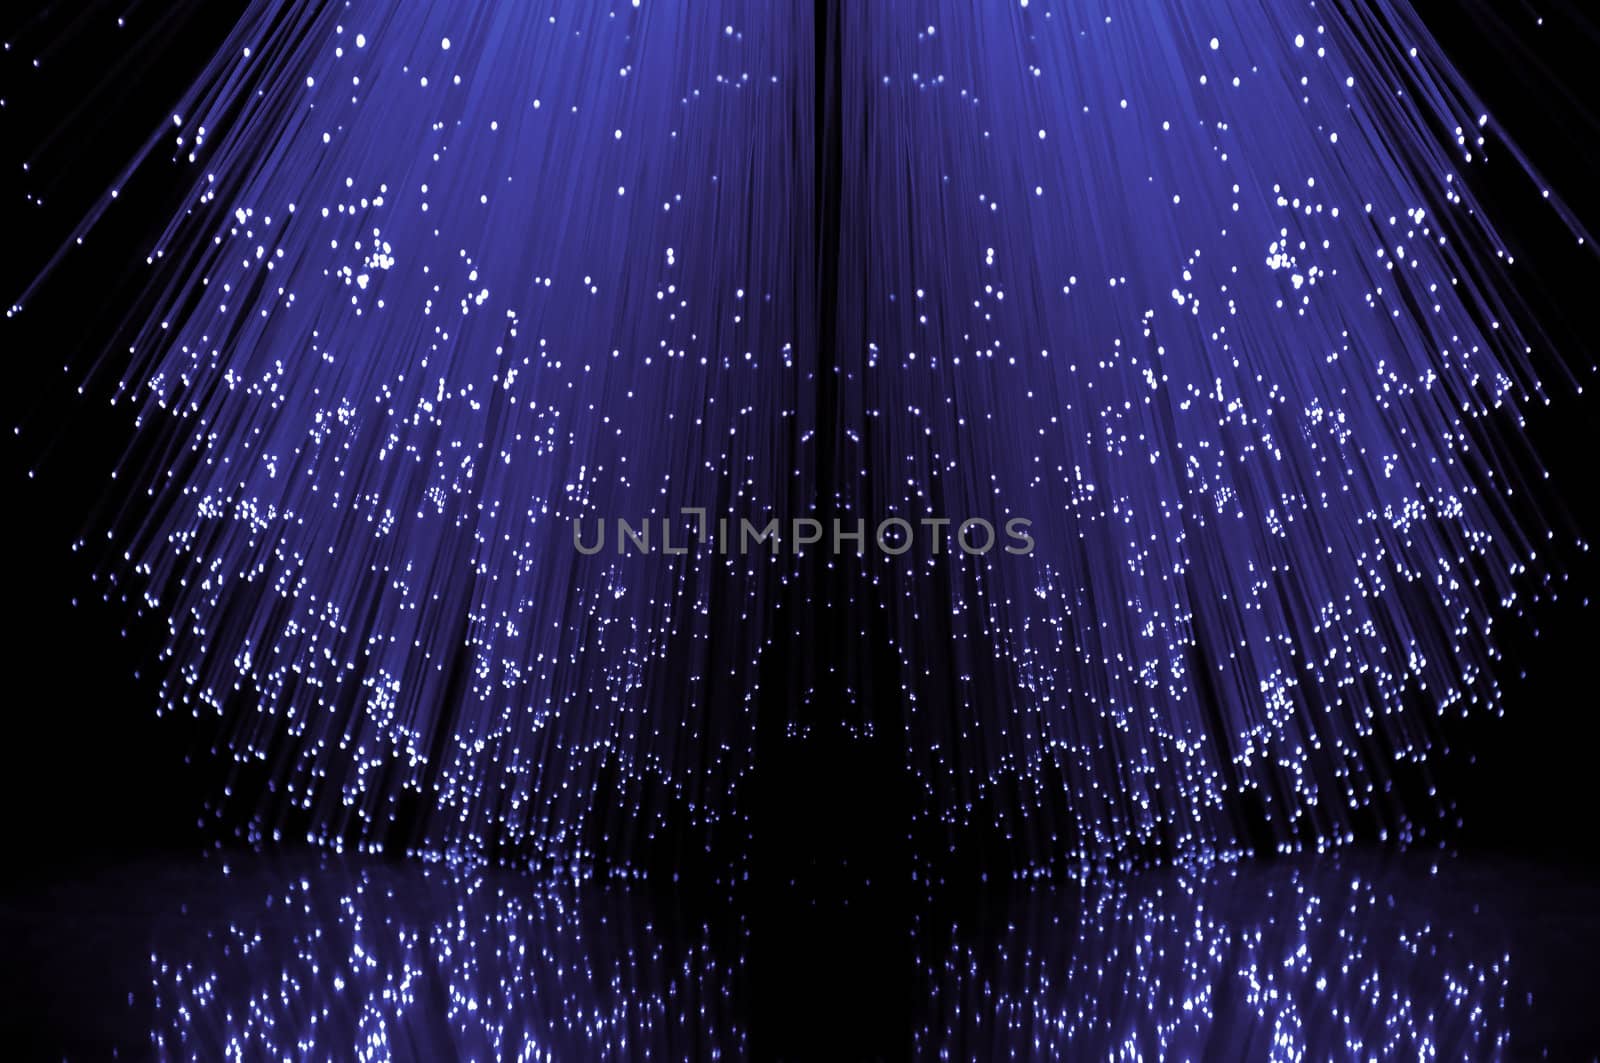 Low level angle capturing the ends of many illuminated violet fibre optic light strands against a black background in reflecting into the foreground.